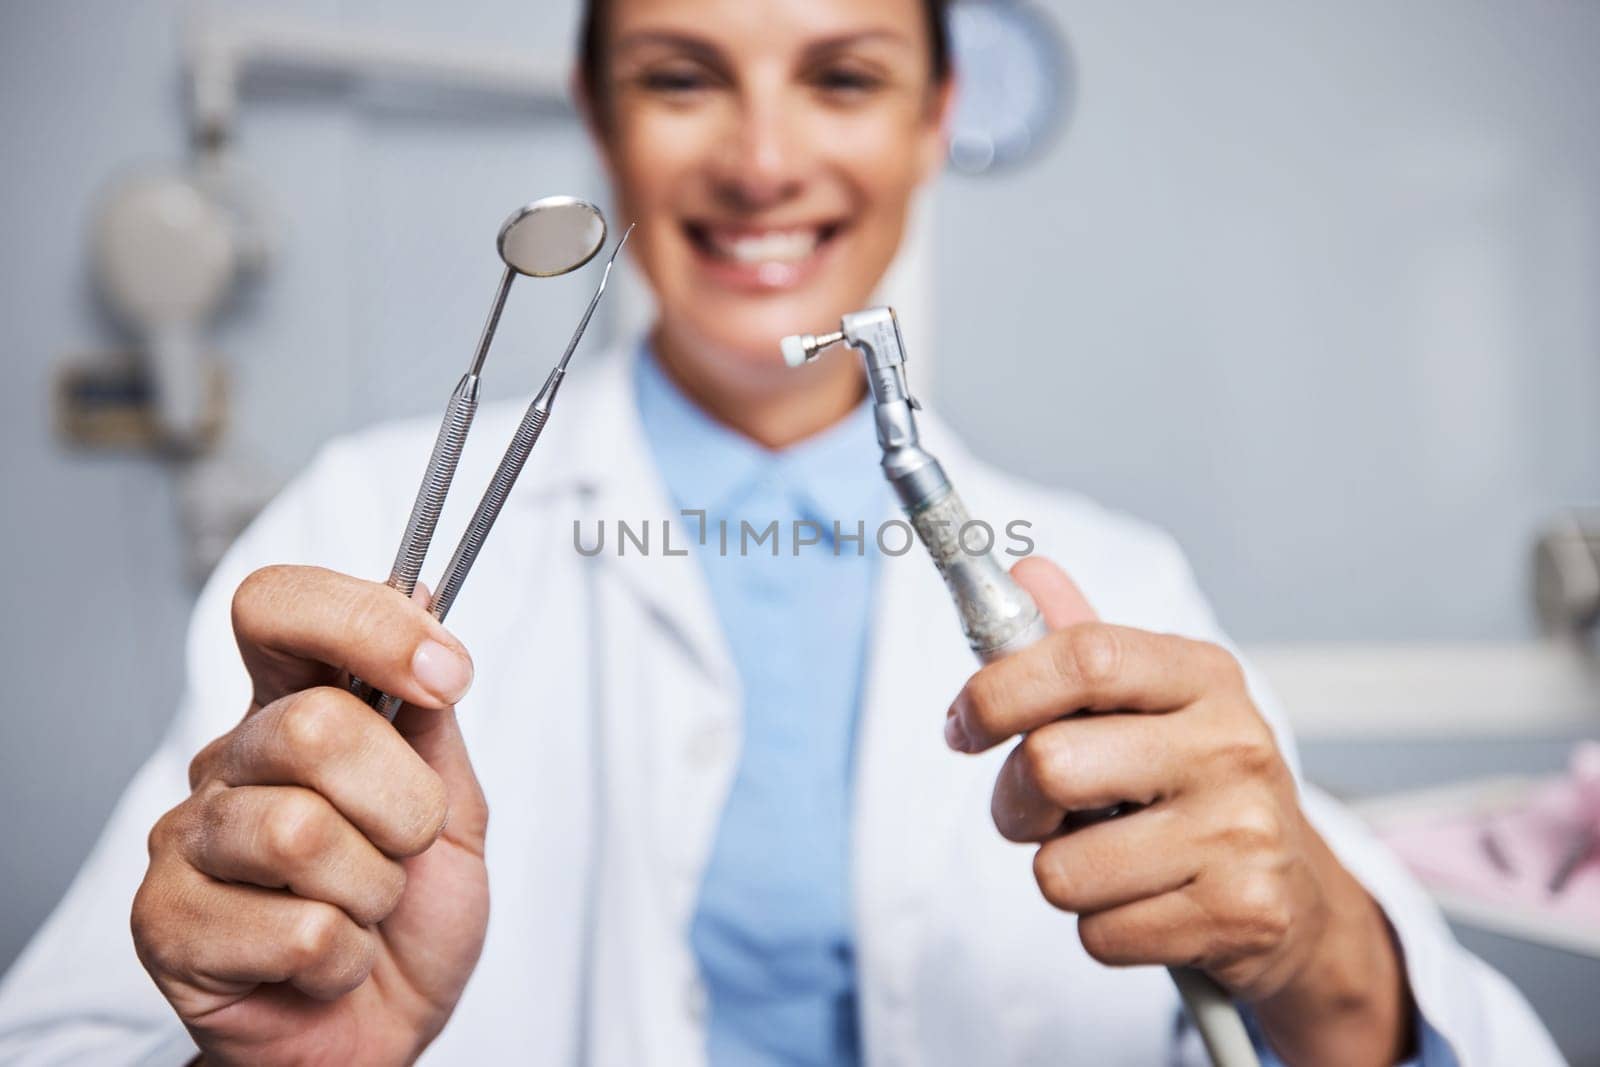 These clean like a dream. Portrait of a young woman holding teeth cleaning tools in her dentists office. by YuriArcurs